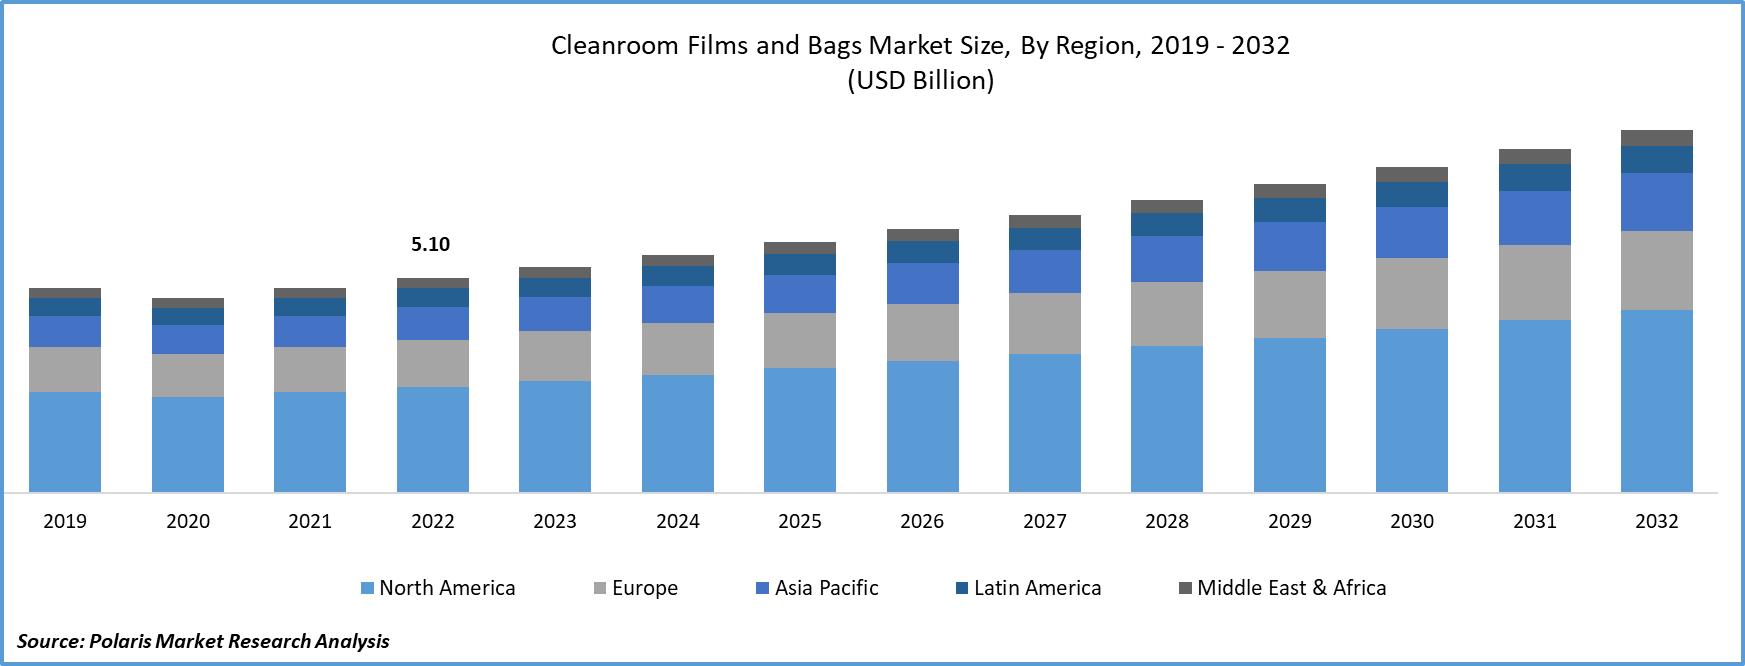 Cleanroom Films and Bags Market Size